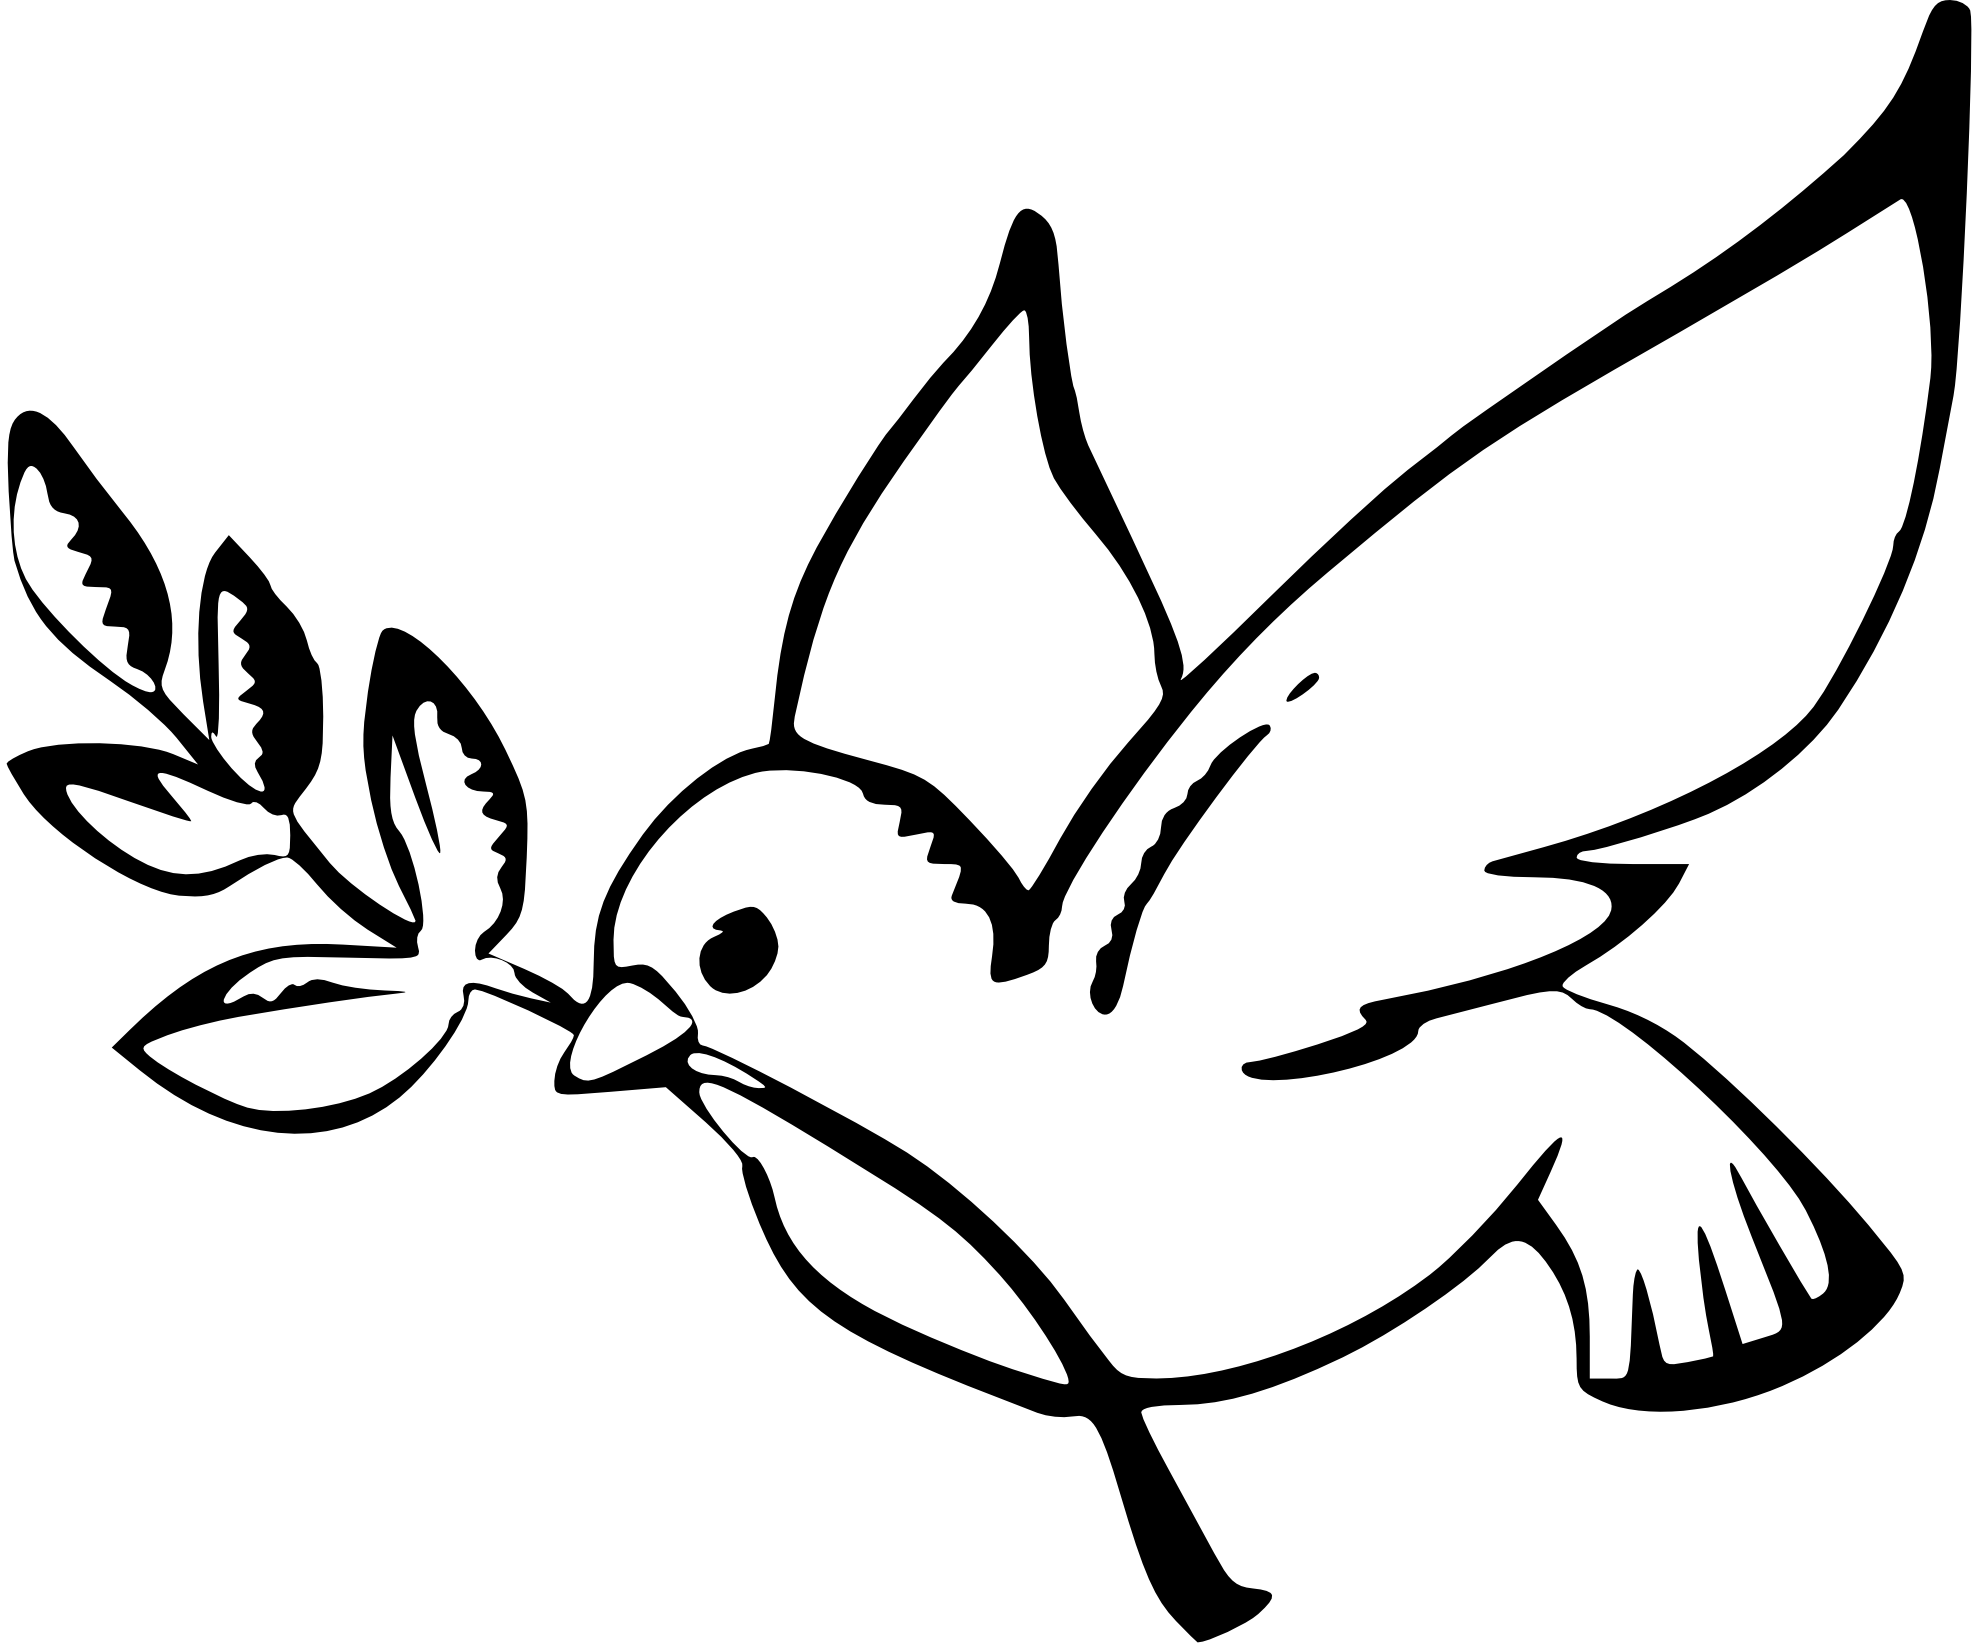 White Dove Drawings - ClipArt Best